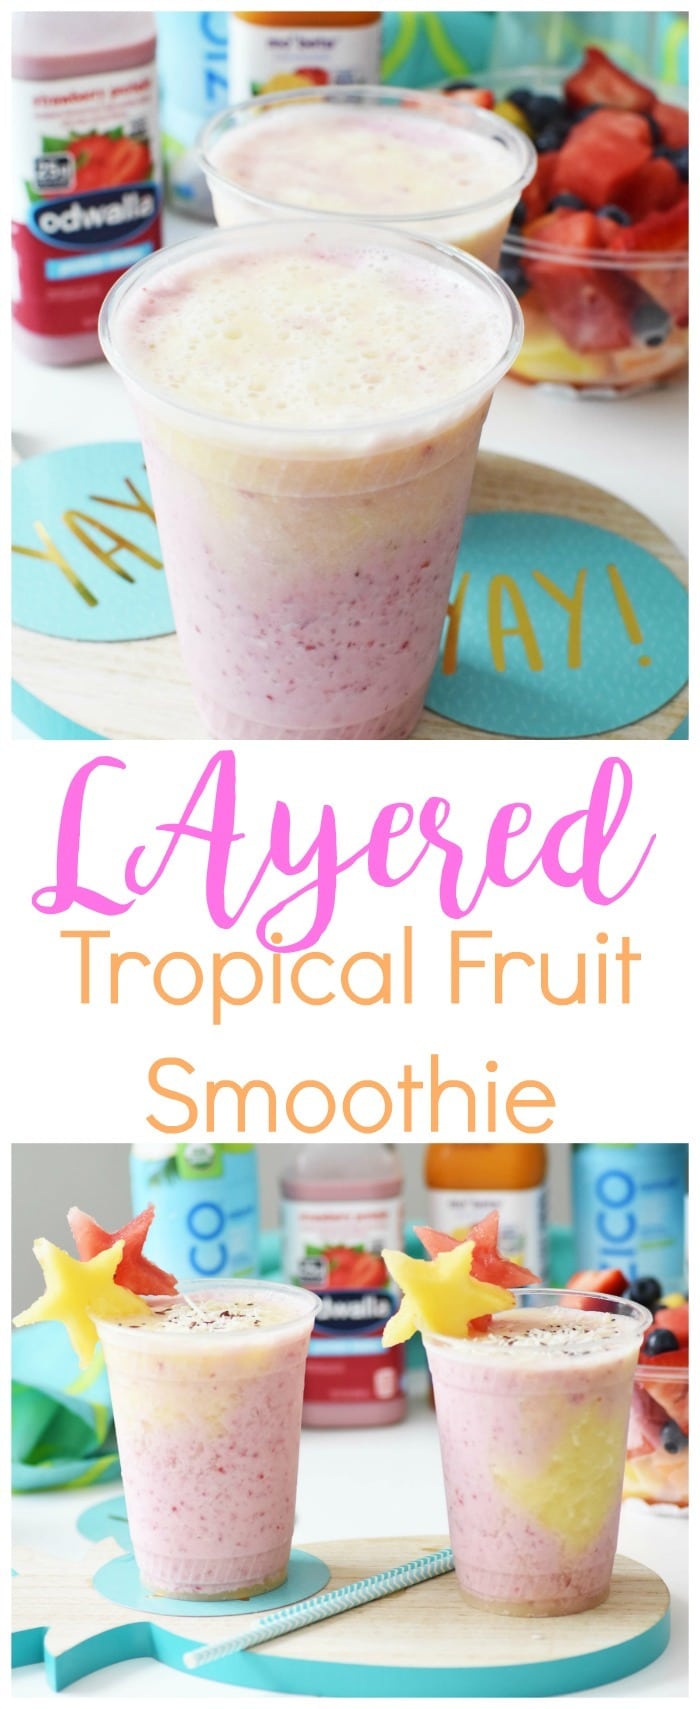 Layered Tropical Fruit Smoothie with Protein. This pink and yellow layered smoothie features a variety of fruits.